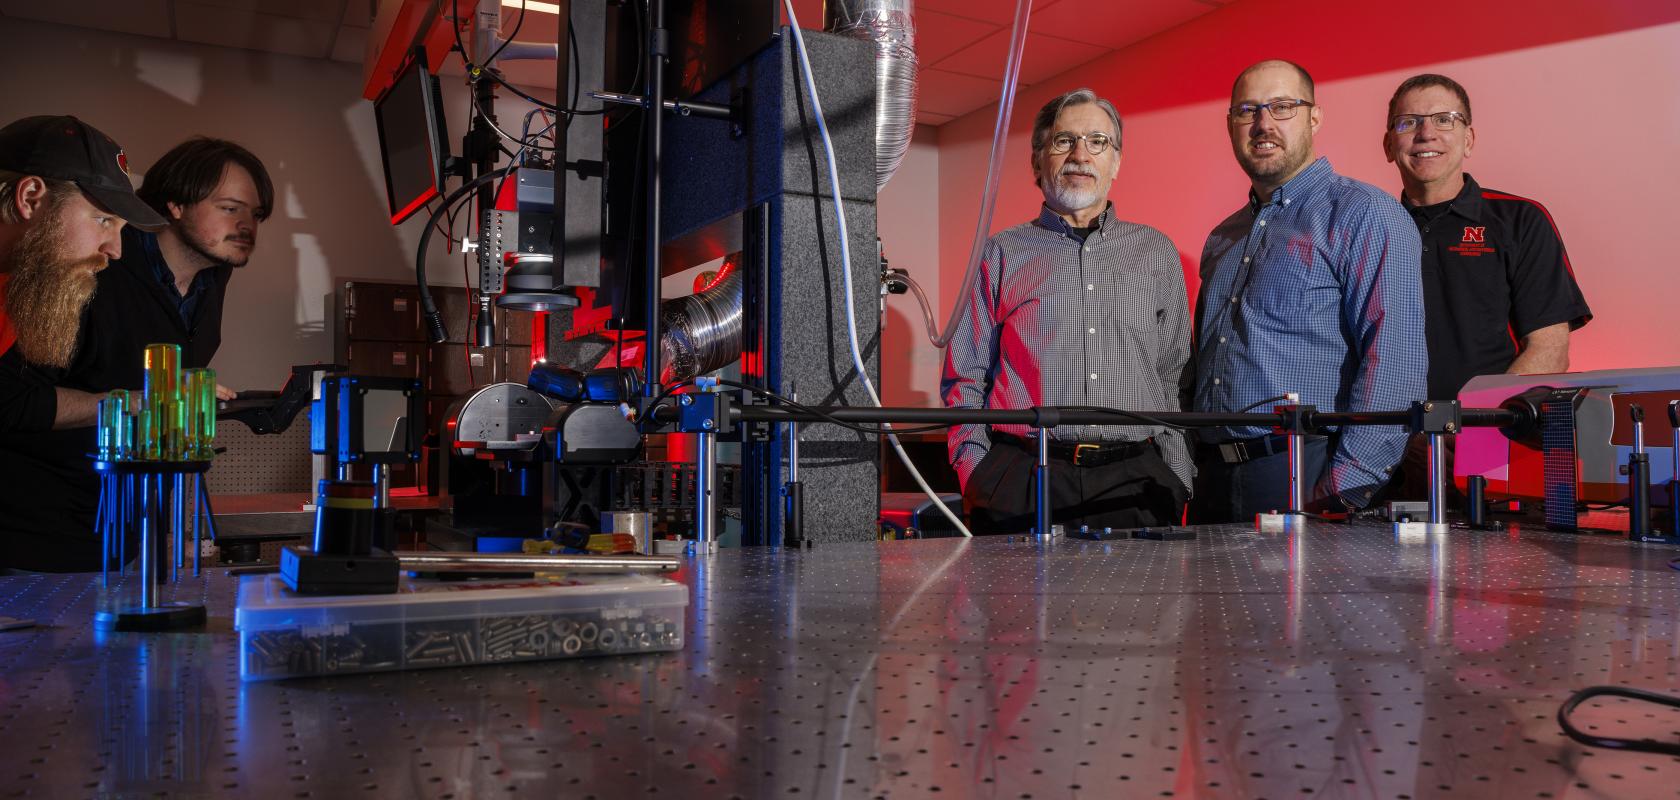 Researchers stand around a light table at the Center for Electro-optics and Functionalized Surfaces, University of Nebraska-Lincoln